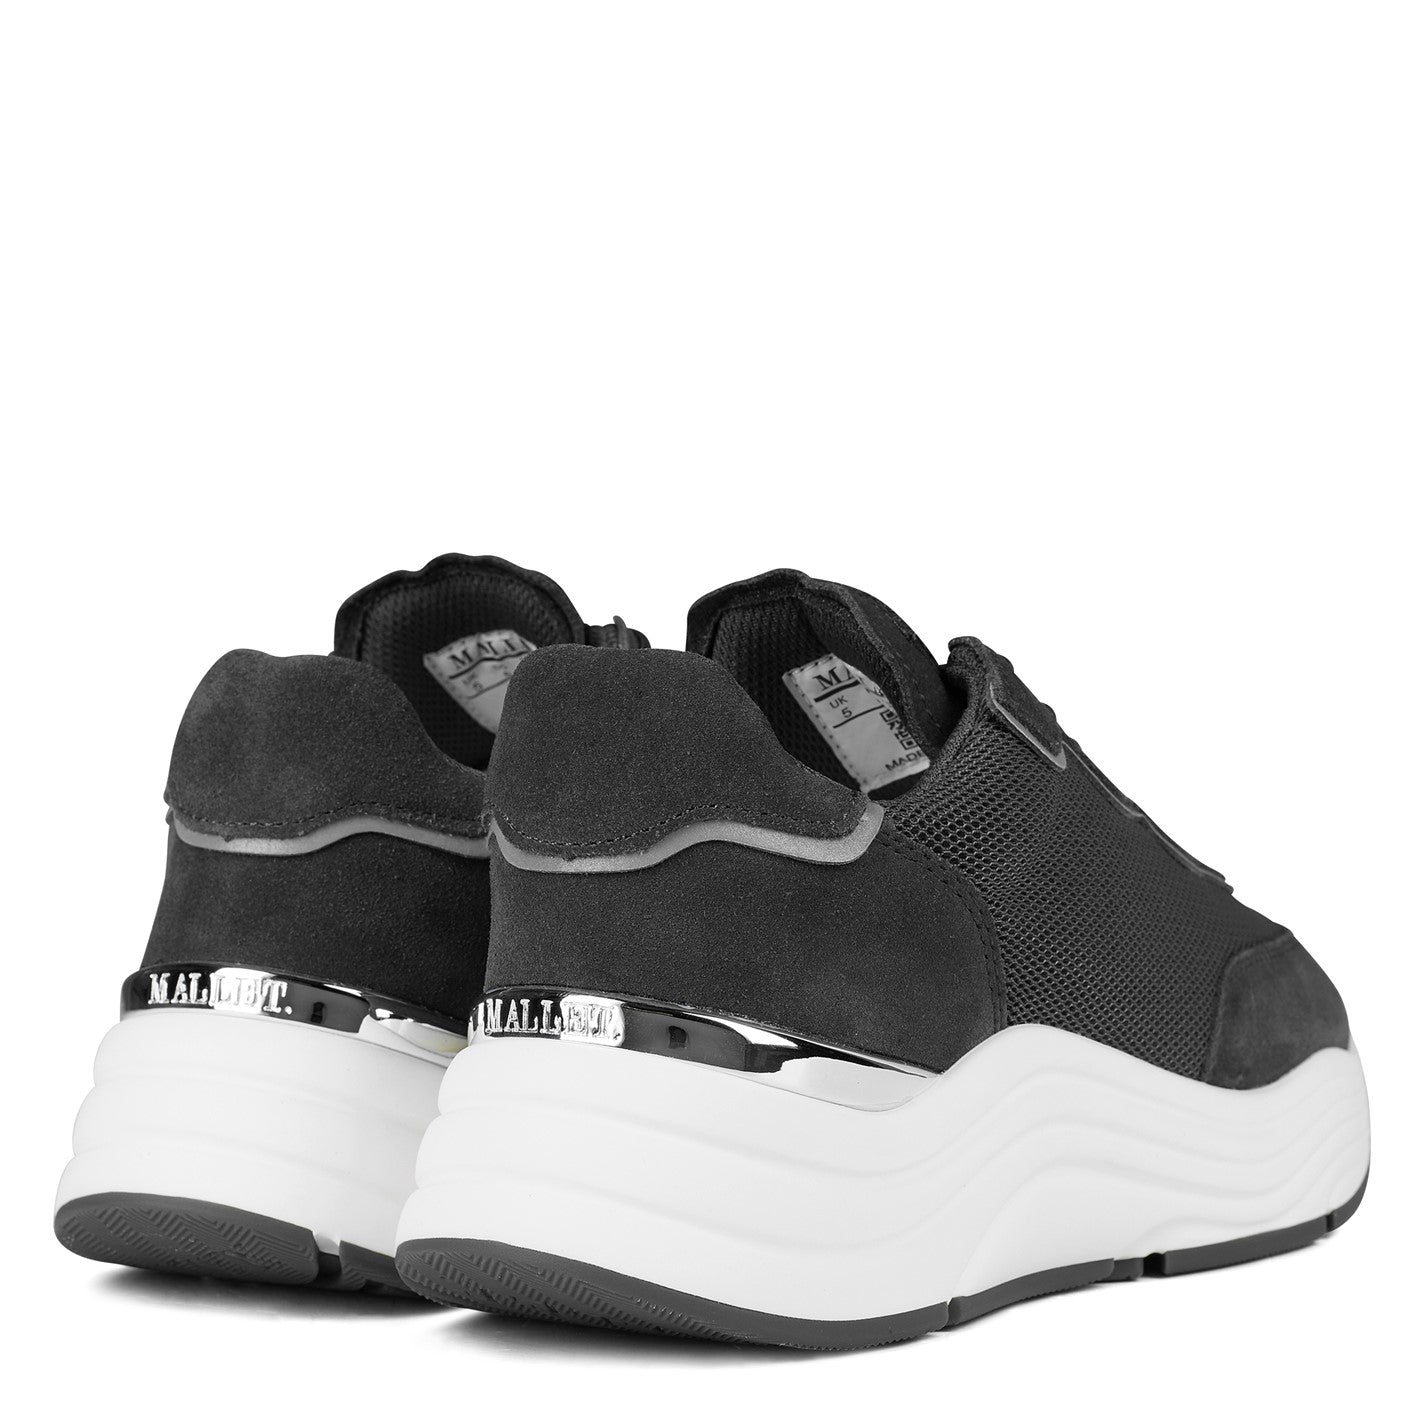 Mallet Black Trainers - DANYOUNGUK